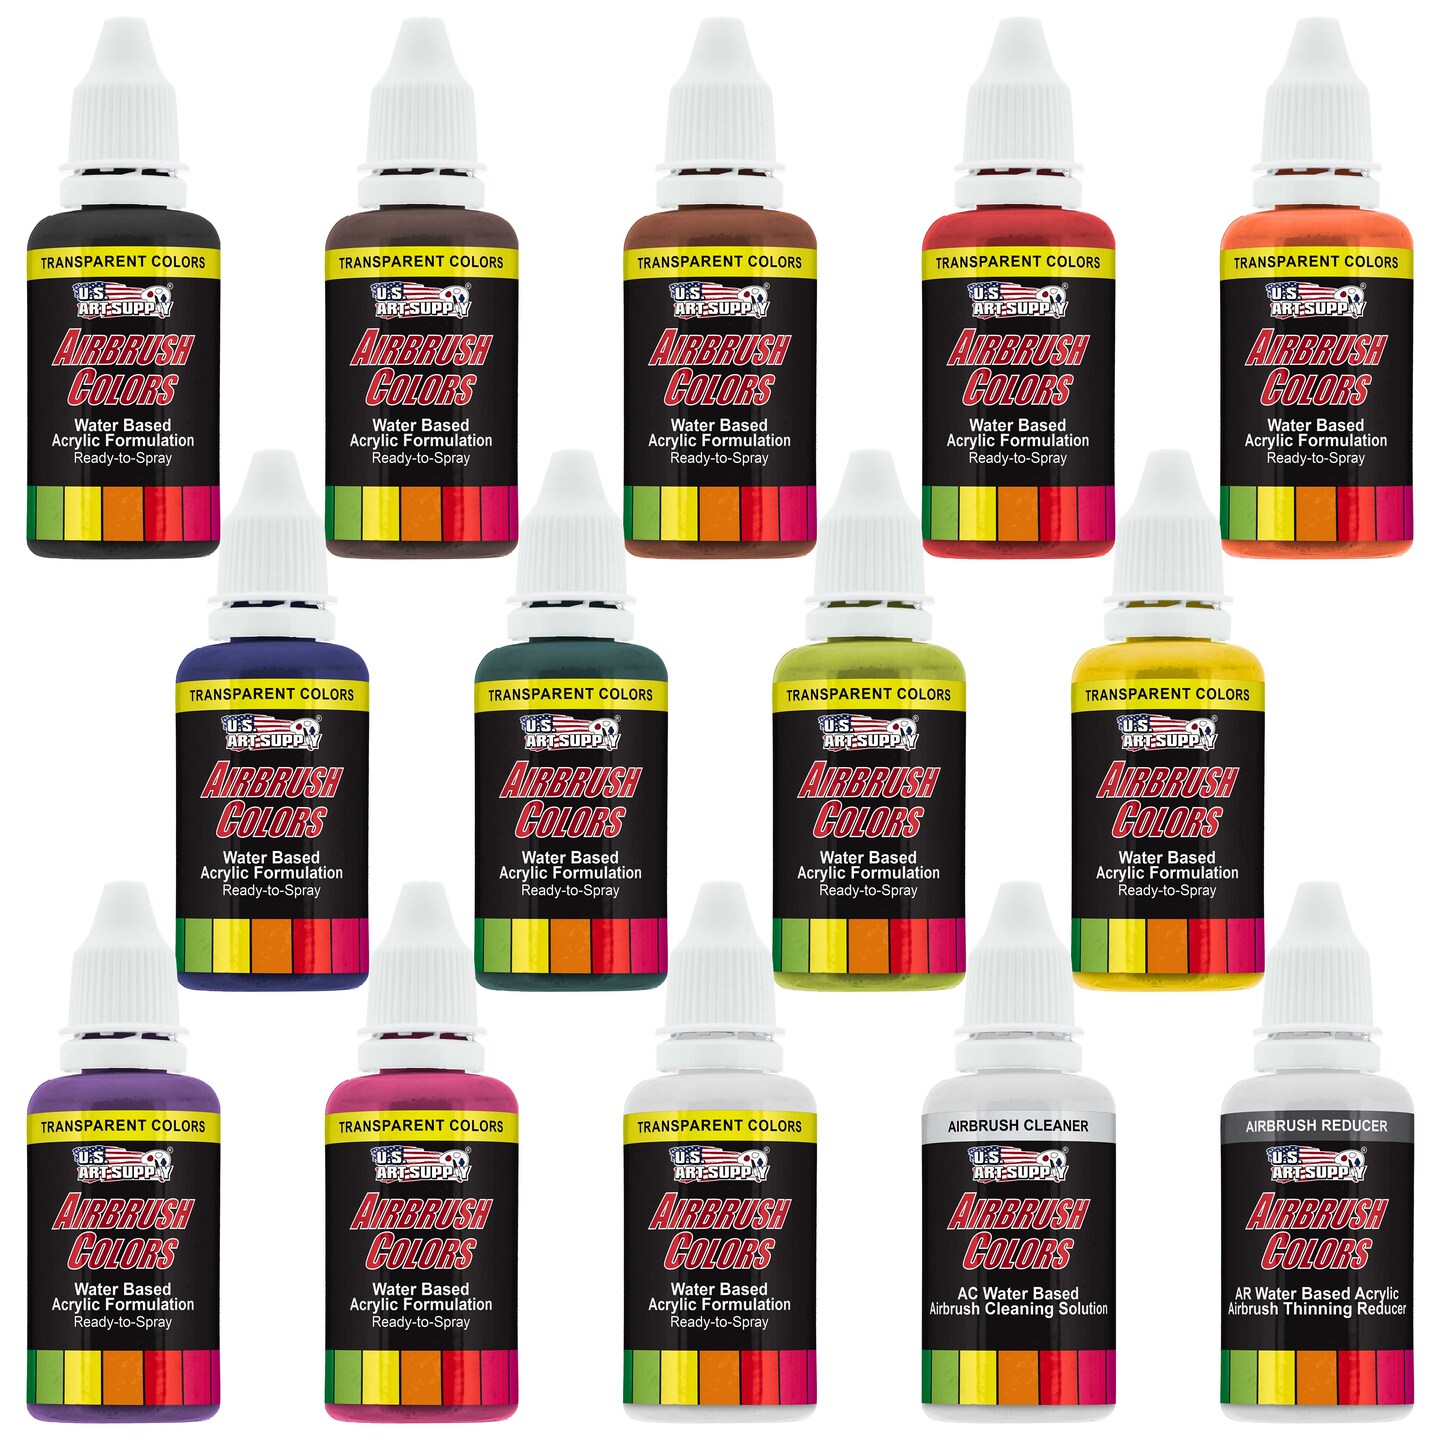 12 Color Acrylic Transparent Colors Airbrush Paint Set with Reducer &#x26; Cleaner, 1 oz. Bottles